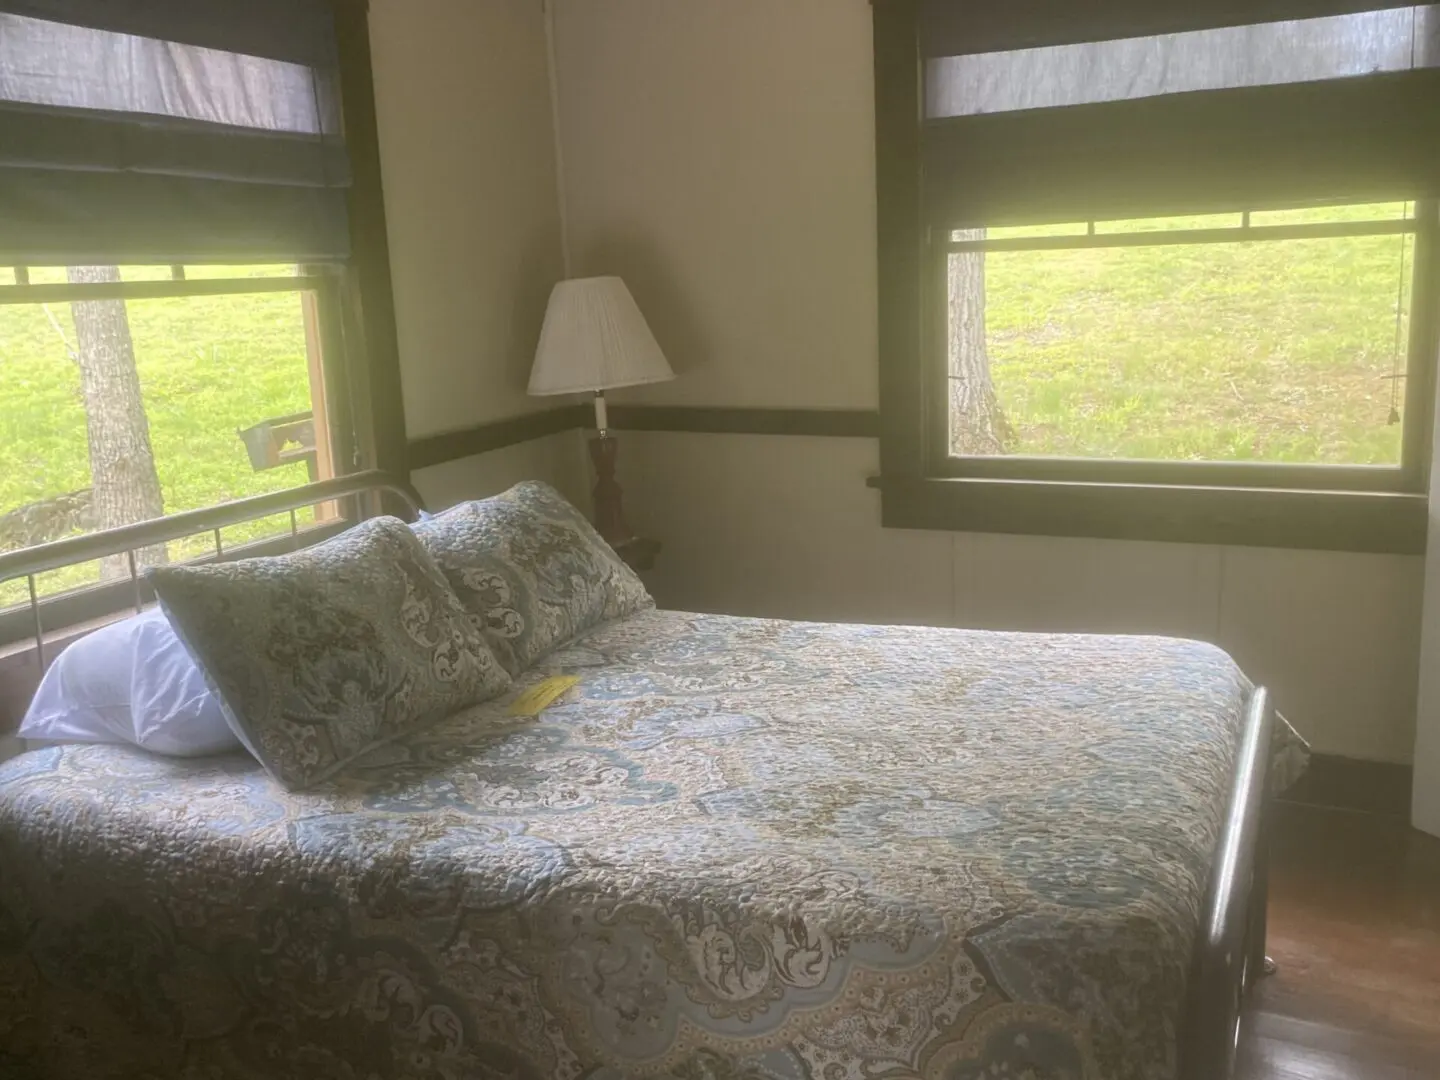 A bed room with a large bed and two windows